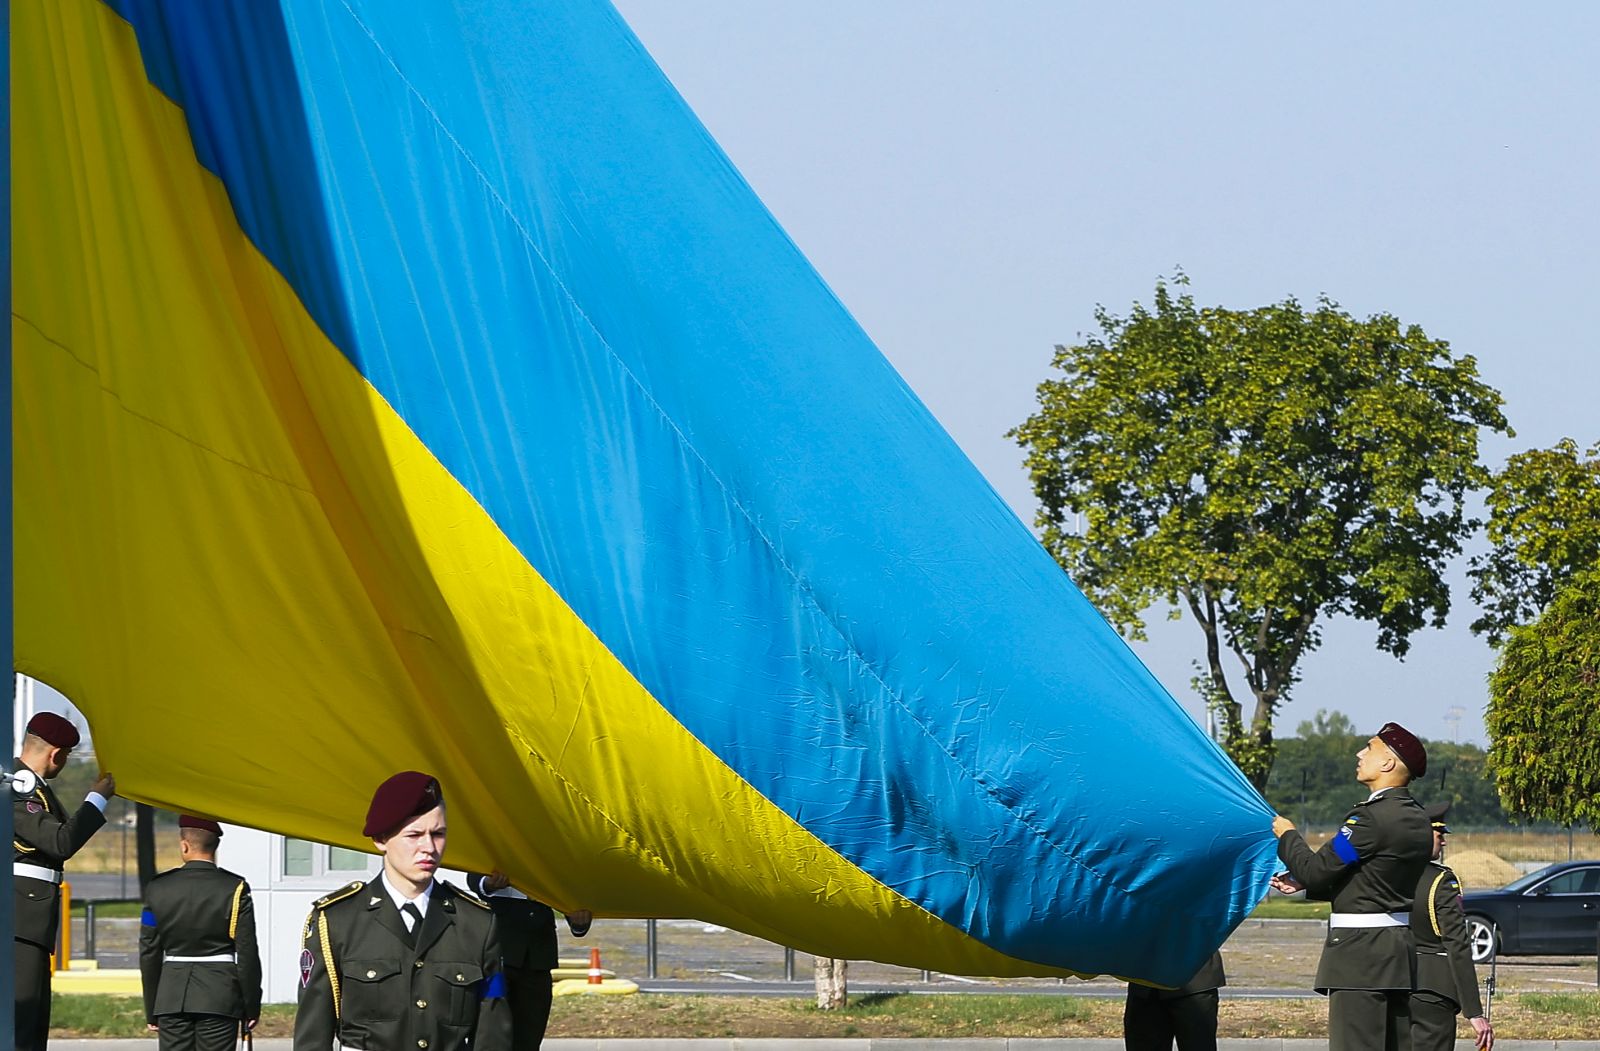 epa10134609 Ukrainian Guard of Honor soldiers hoist a national flag in Odesa, Ukraine, 23 August 2022. Ukraine marks National Flag Day one day prior to Independence Day, which is celebrated on 24 August. Kharkiv and surrounding areas have been the target of heavy shelling since February 2022, when Russian troops entered Ukraine starting a conflict that has provoked destruction and a humanitarian crisis.  EPA/STRINGER